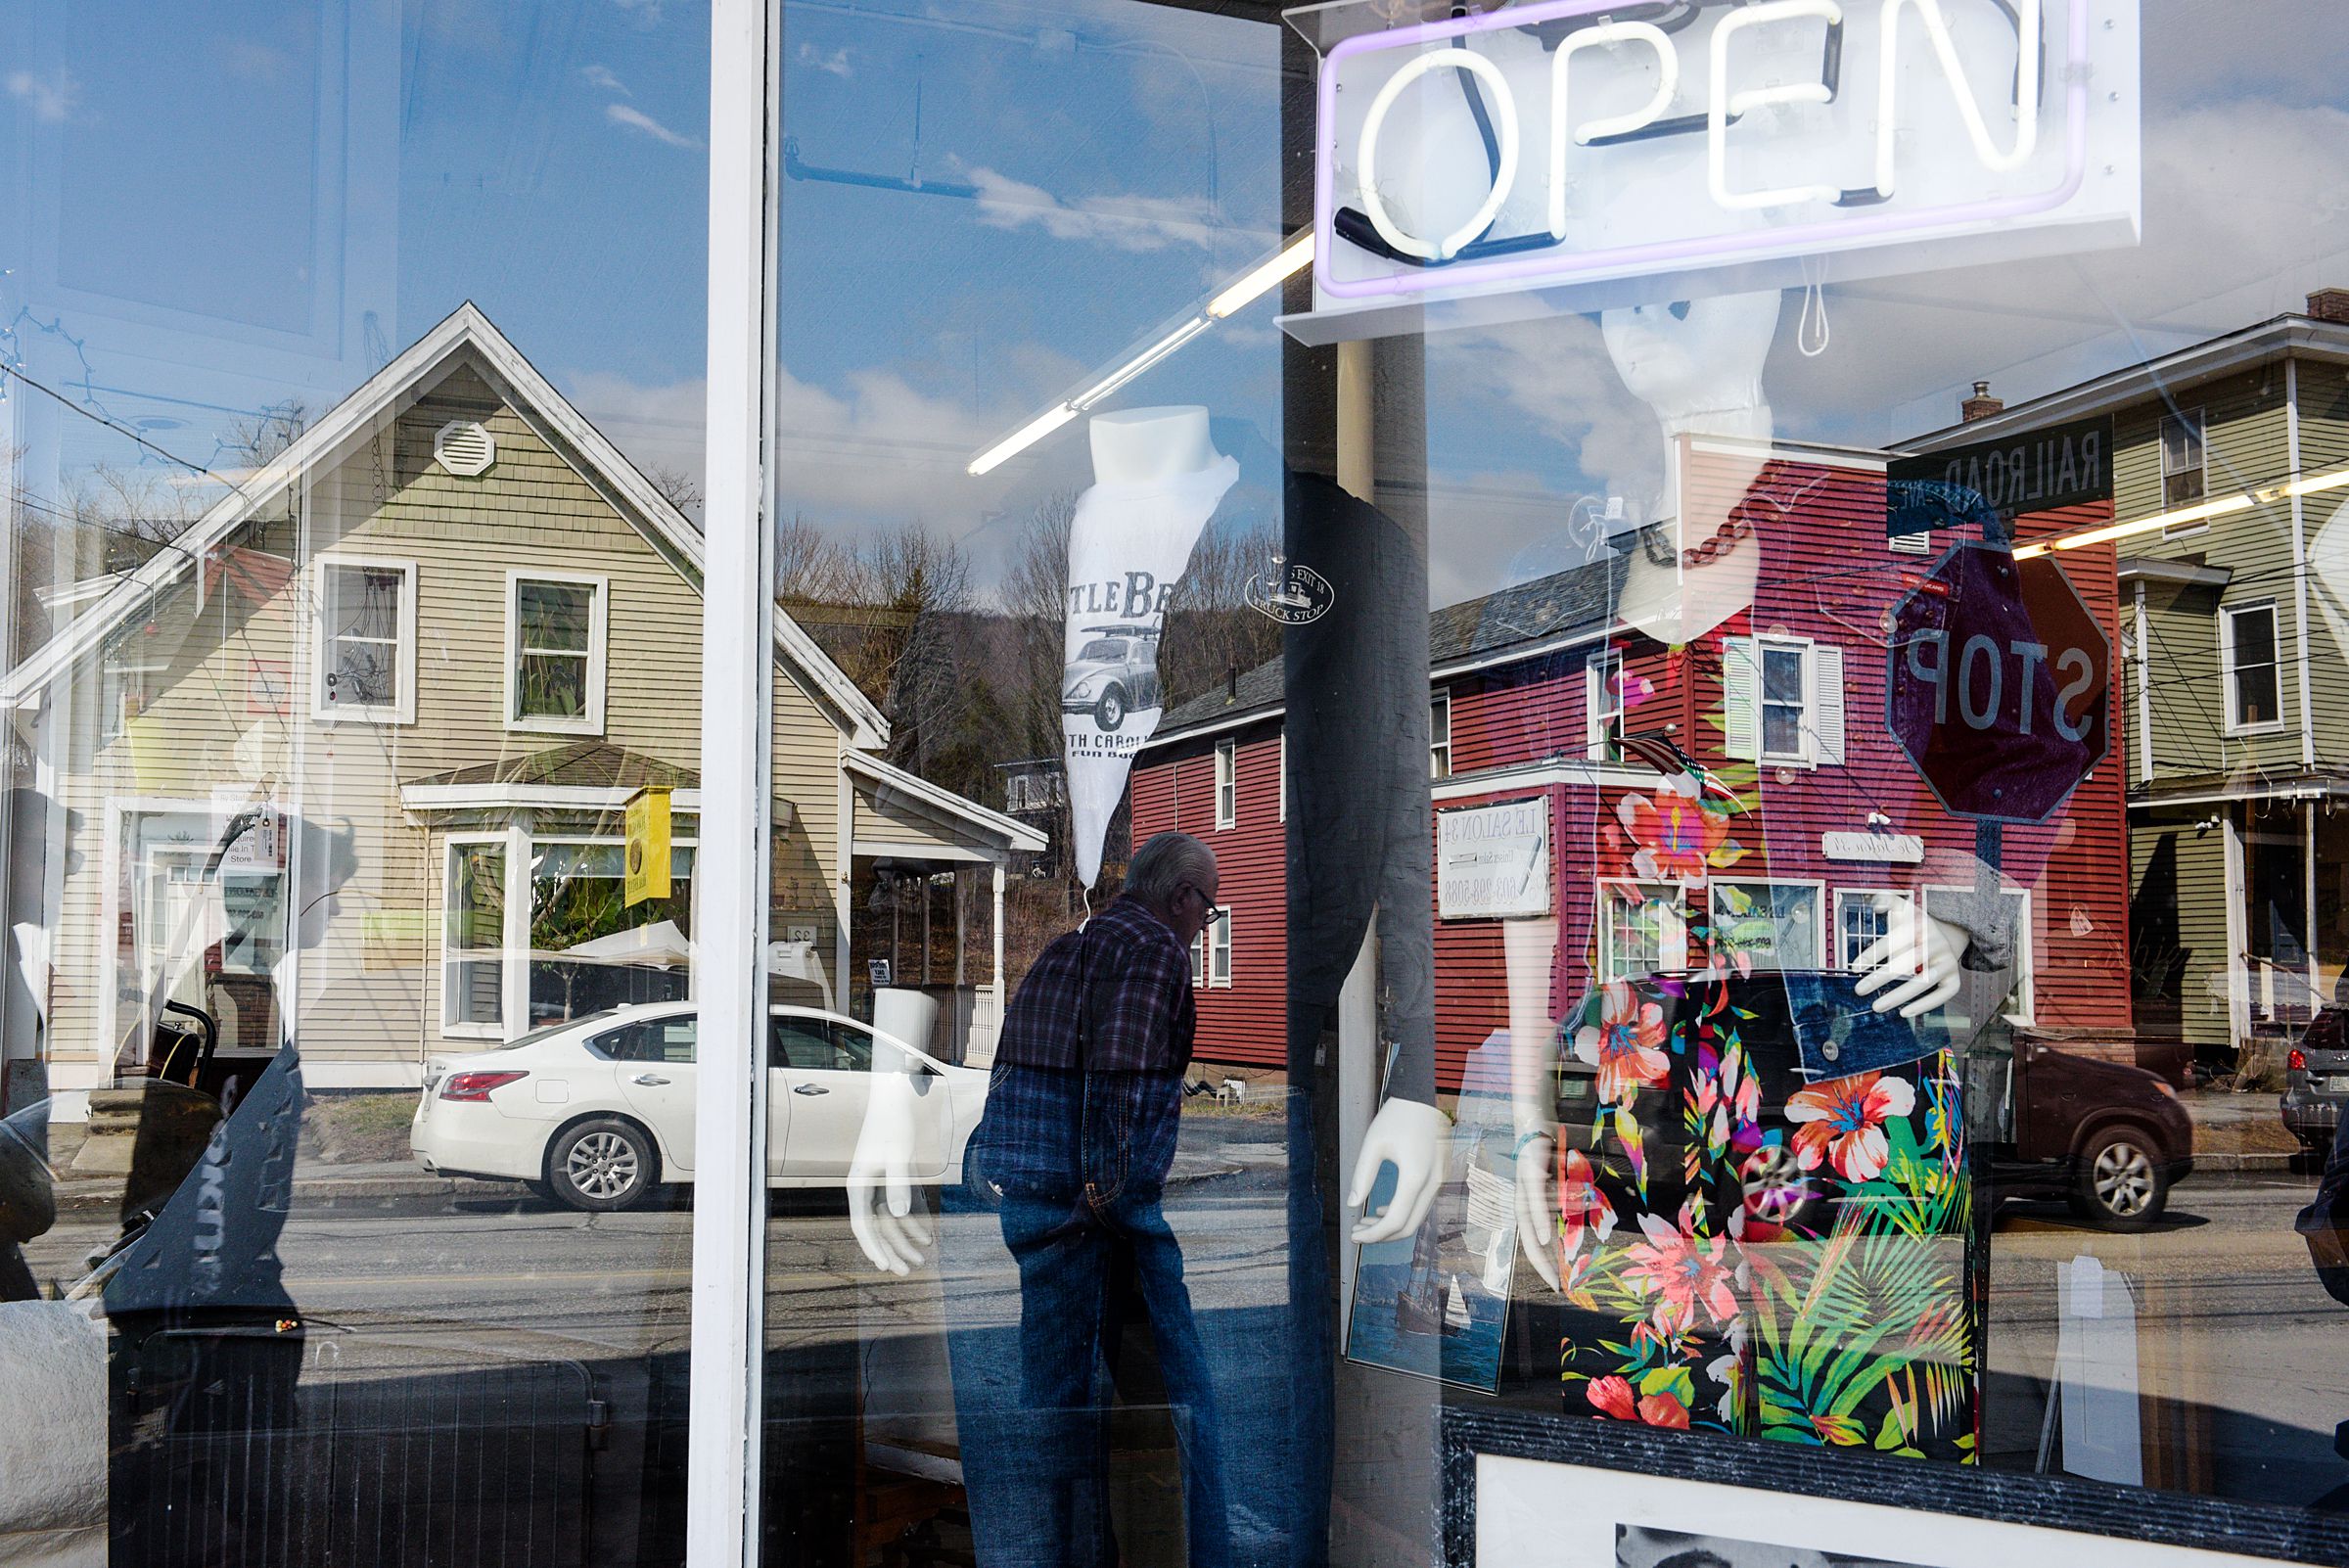 Buildings on Main Street in West Lebanon, N.H., are reflected in the windows of Consign and Design, a three-floor second-hand store, Friday, March 30, 2021. (Valley News - James M. Patterson) Copyright Valley News. May not be reprinted or used online without permission. Send requests to permission@vnews.com.